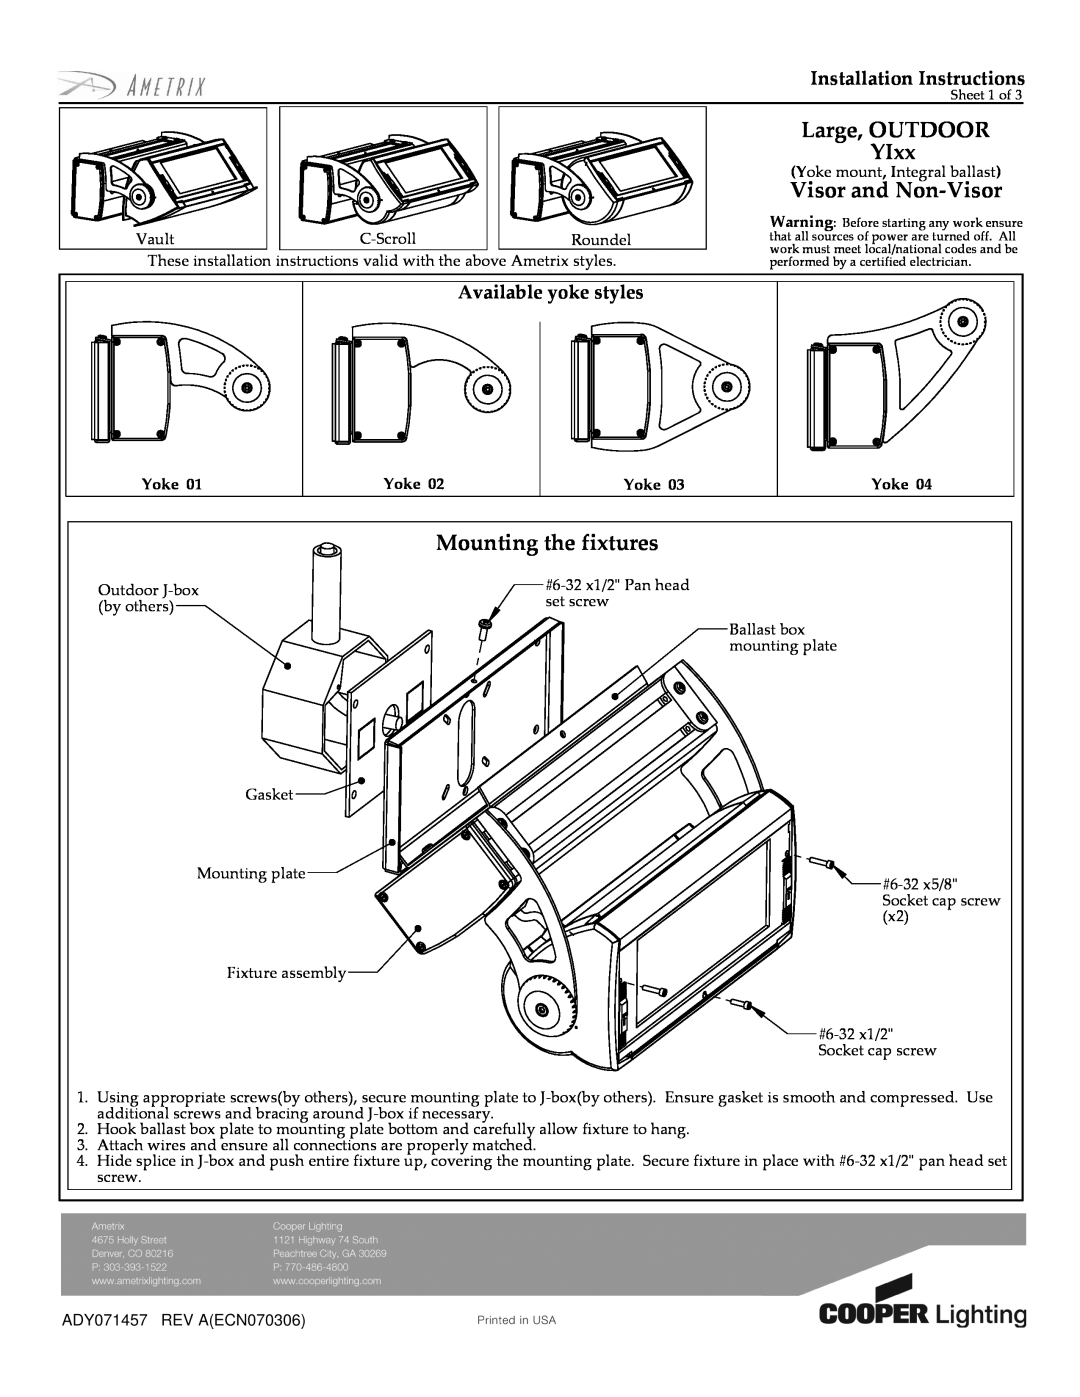 Cooper Lighting installation instructions Large, OUTDOOR YIxx, Visor and Non-Visor, Mounting the fixtures 